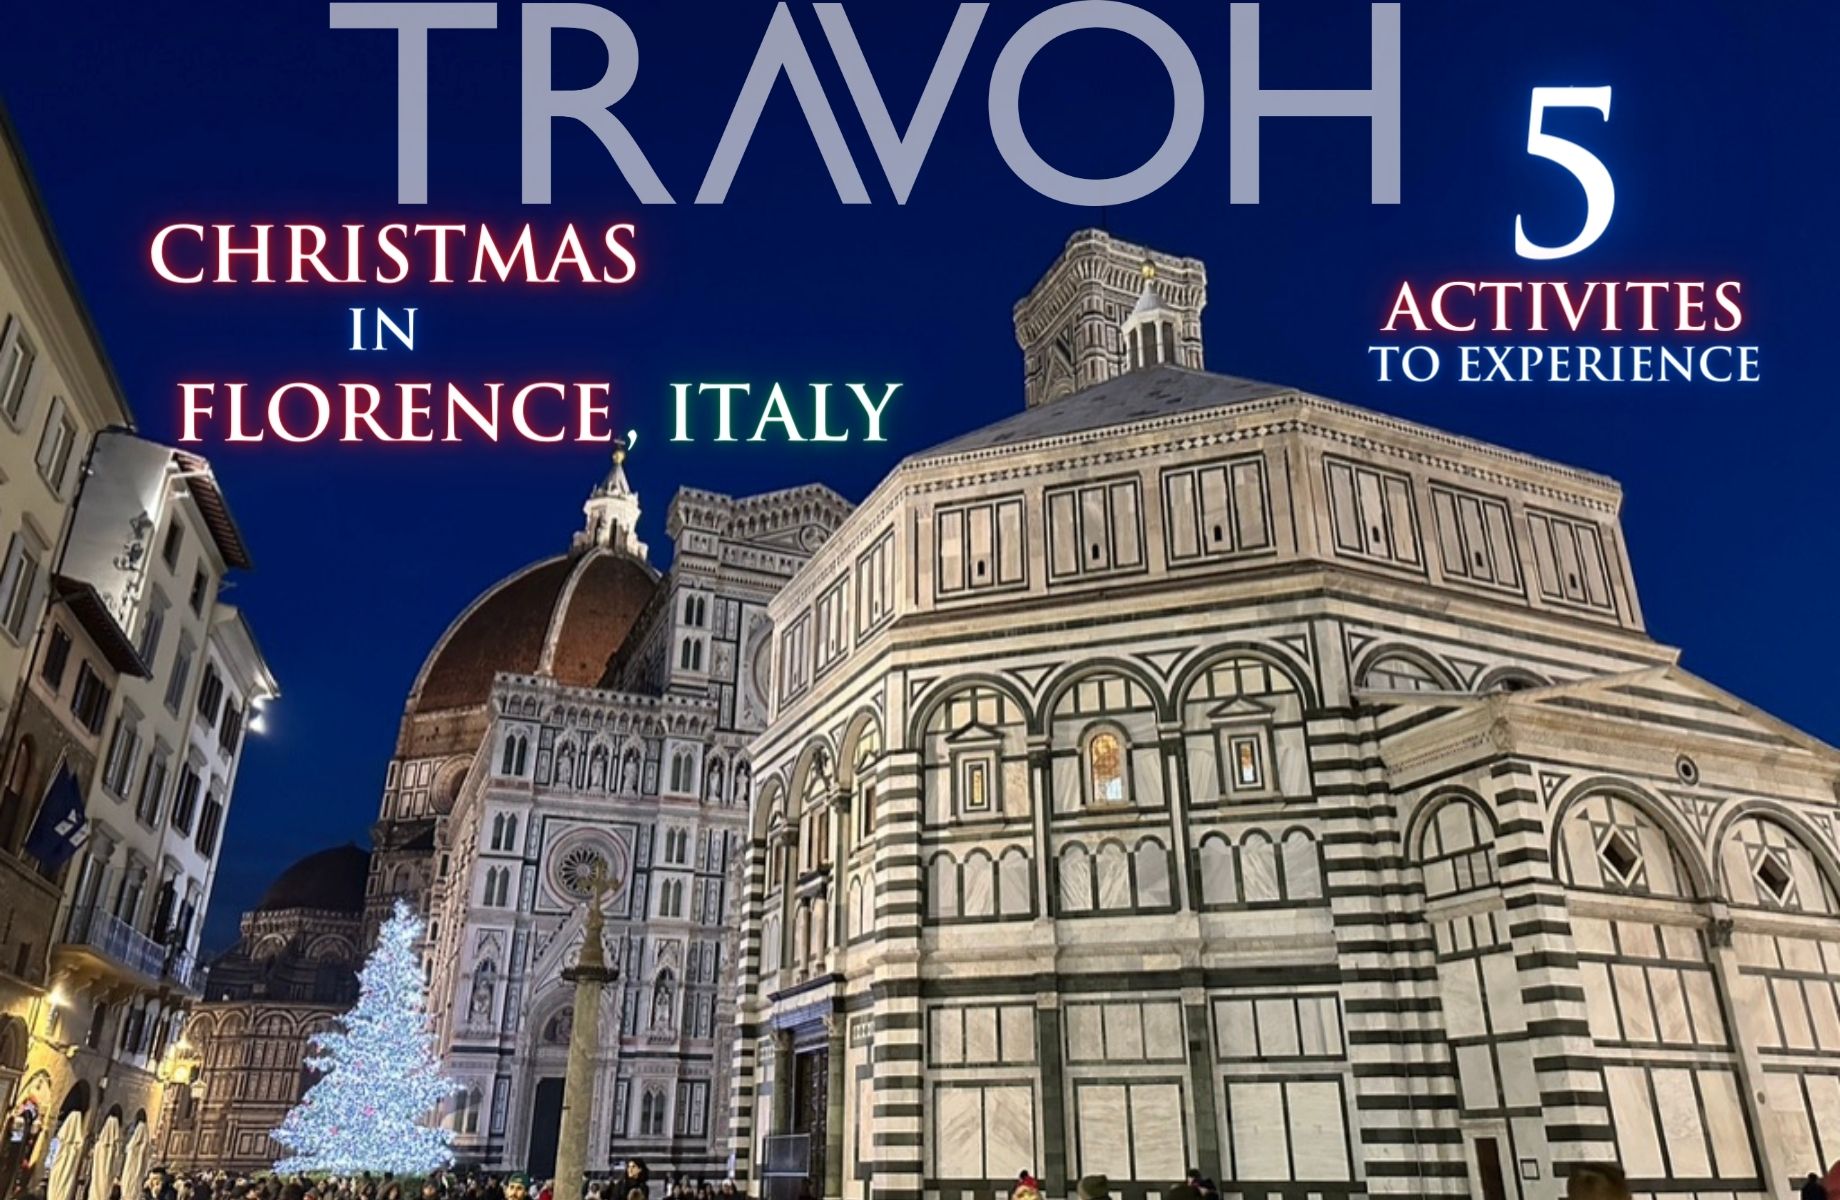 TRAVOH Article Images – Christmas In Florence, Italy – Top 5 Activities To Experience – 1840 x 1200 – 70 Bar – 25 Font